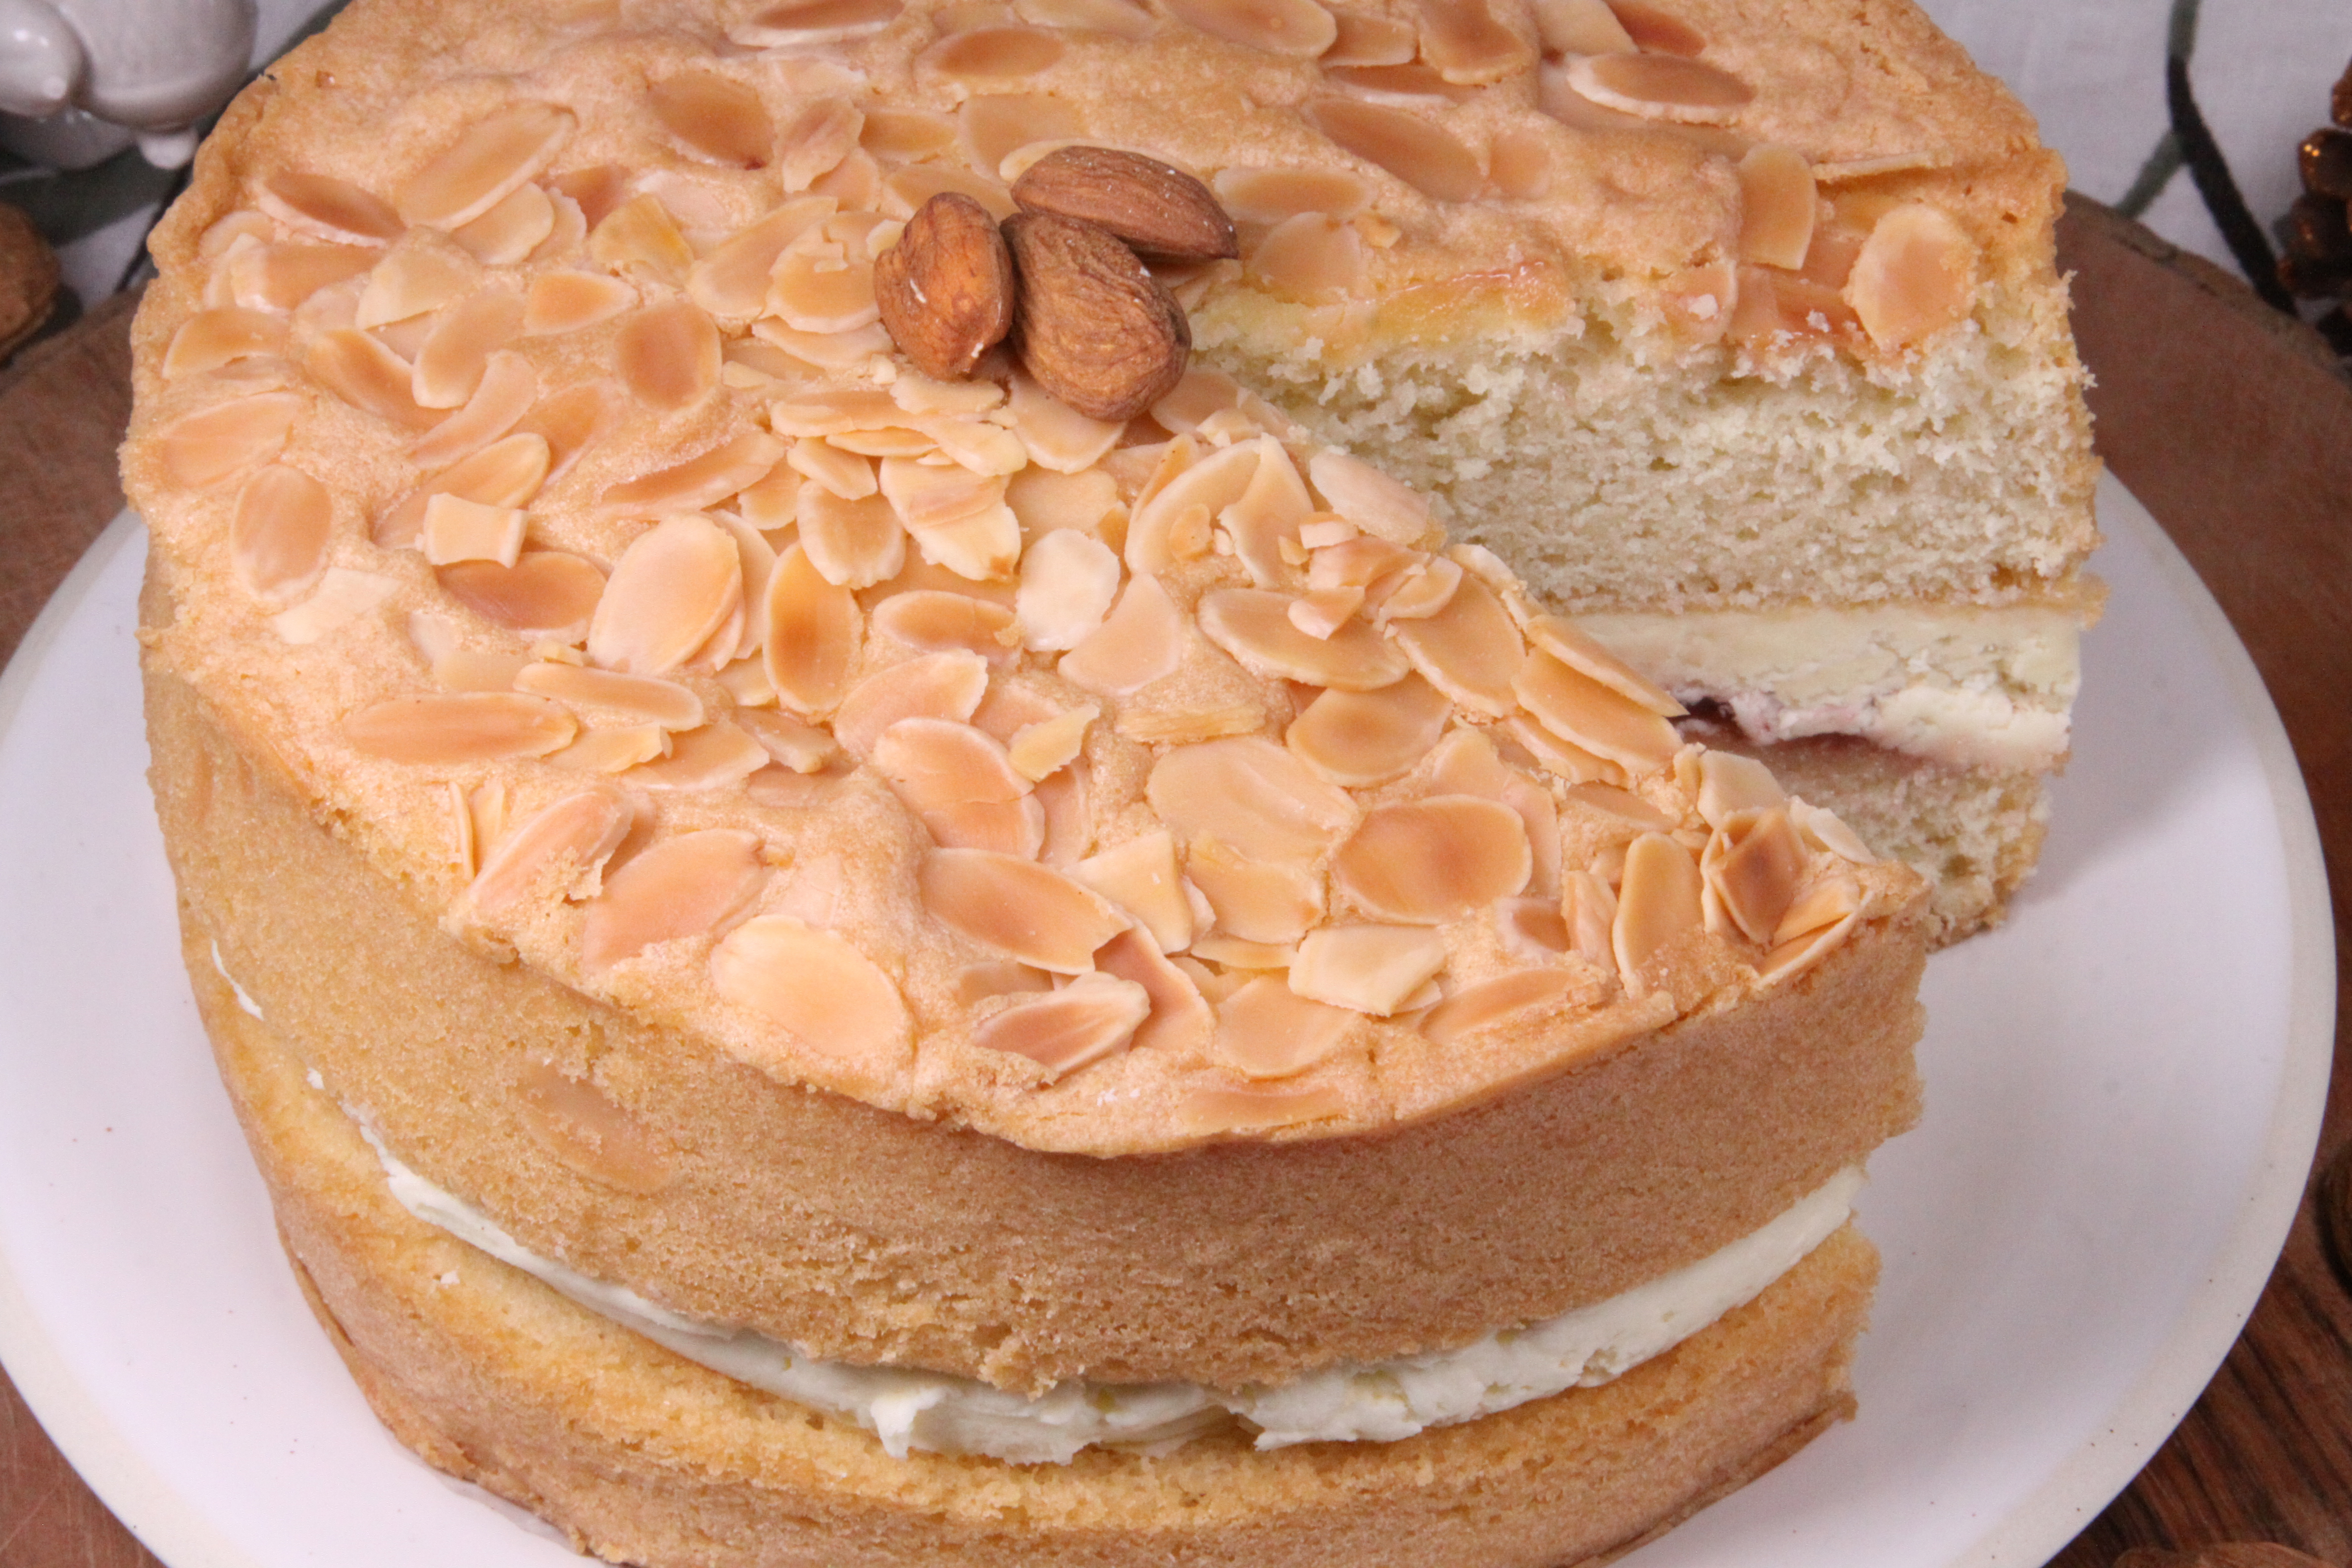 Celebrate the weekend with a Bakewell Sponge Friday! Order by Thursday 2pm for delivery on Friday! £9.99 for a 7 inch Sponge, £16.99 for a 10 inch.